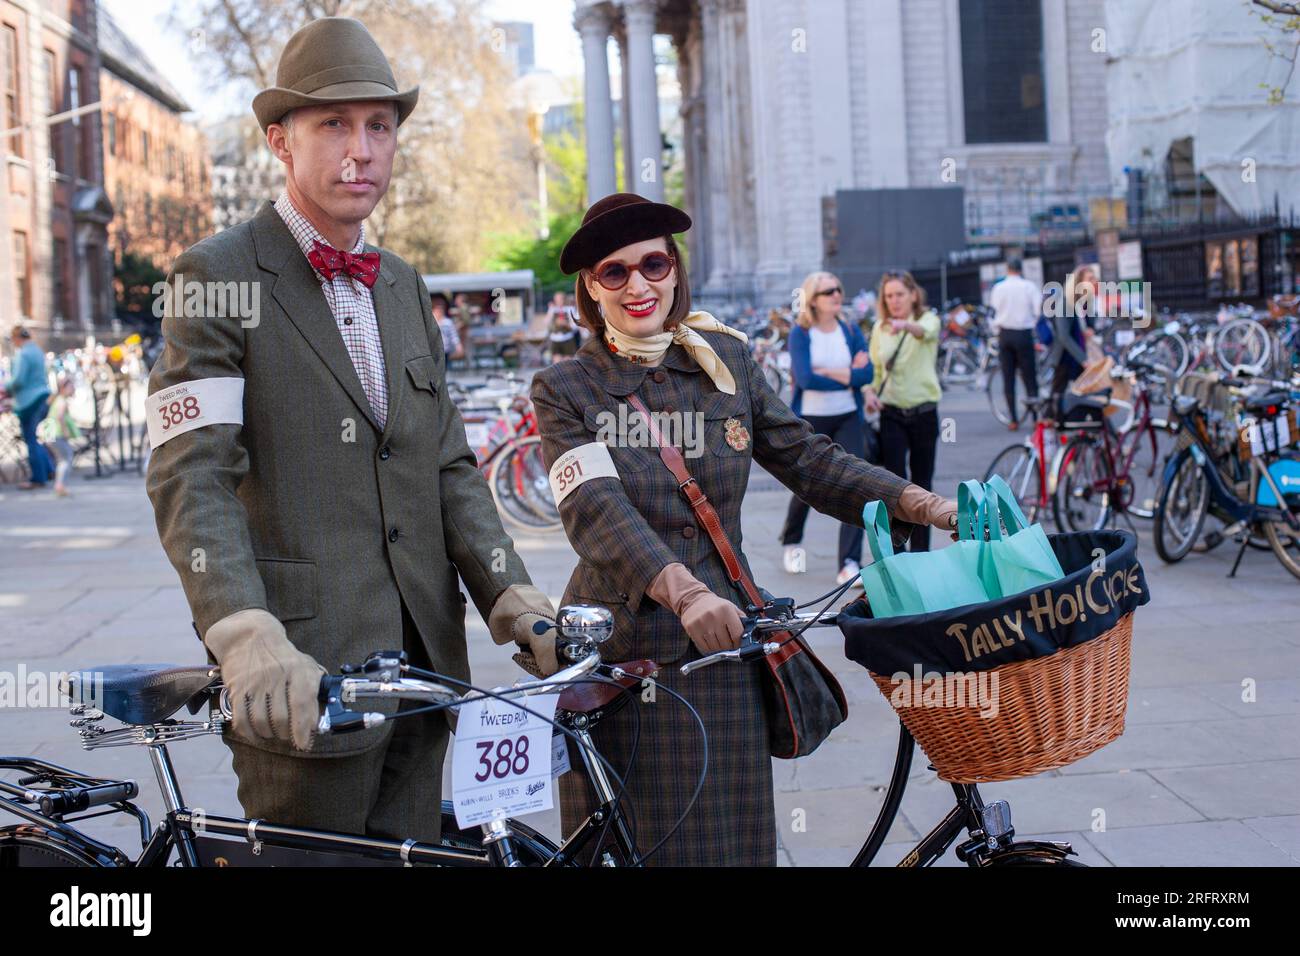 American couple attending the Tweed Run with retro bikes and vintage outfit in London, 2019 , UK Stock Photo